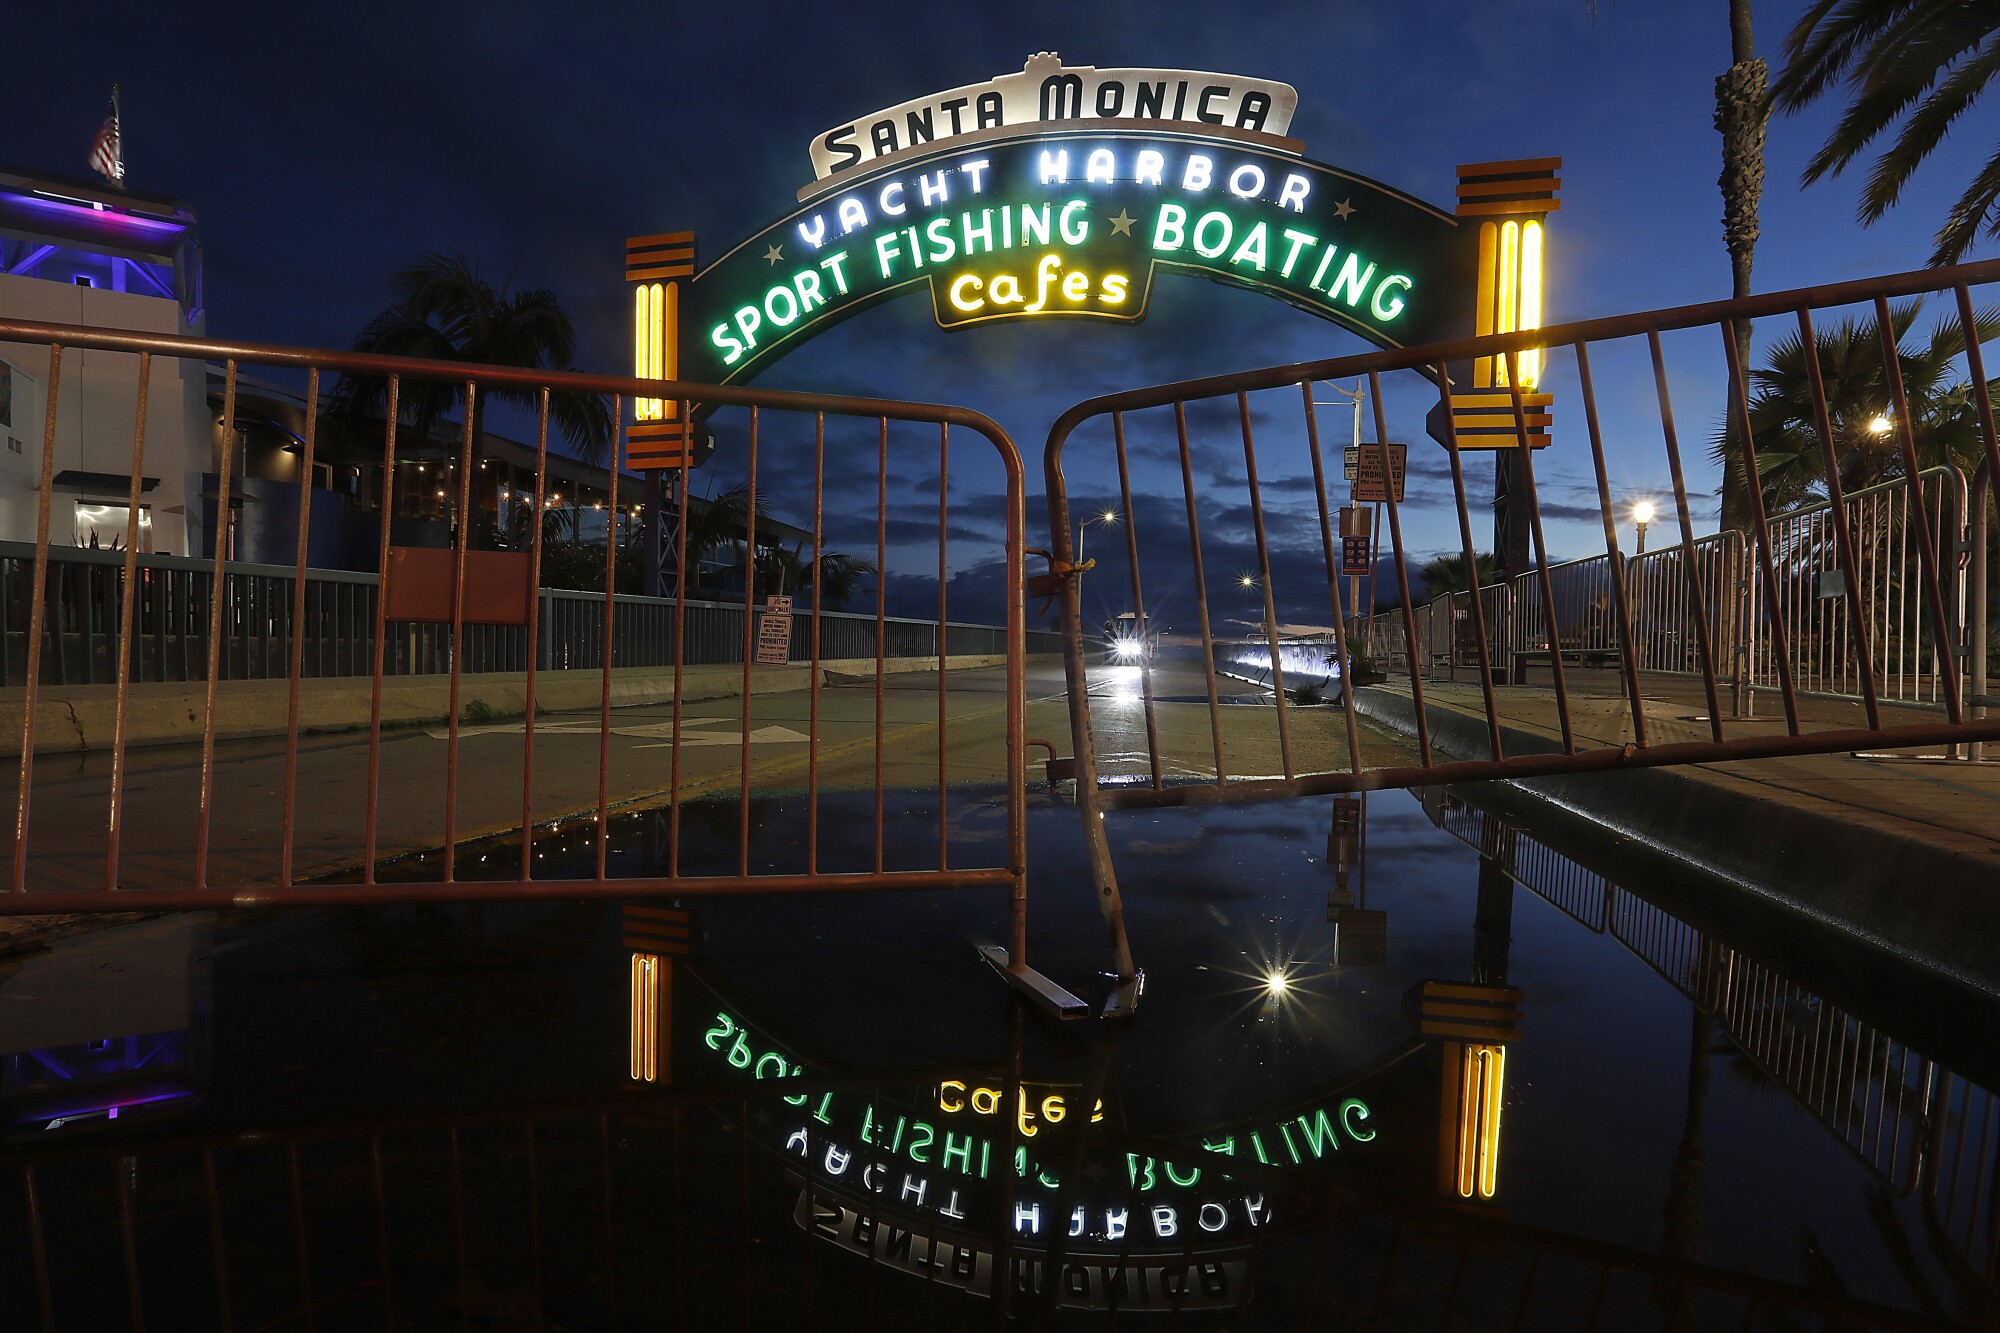 The lights are on but the Santa Monica Pier is closed to the public. Gov. Gavin Newson has ordered California residents to stay home as a precaution against the spread of coronavirus.